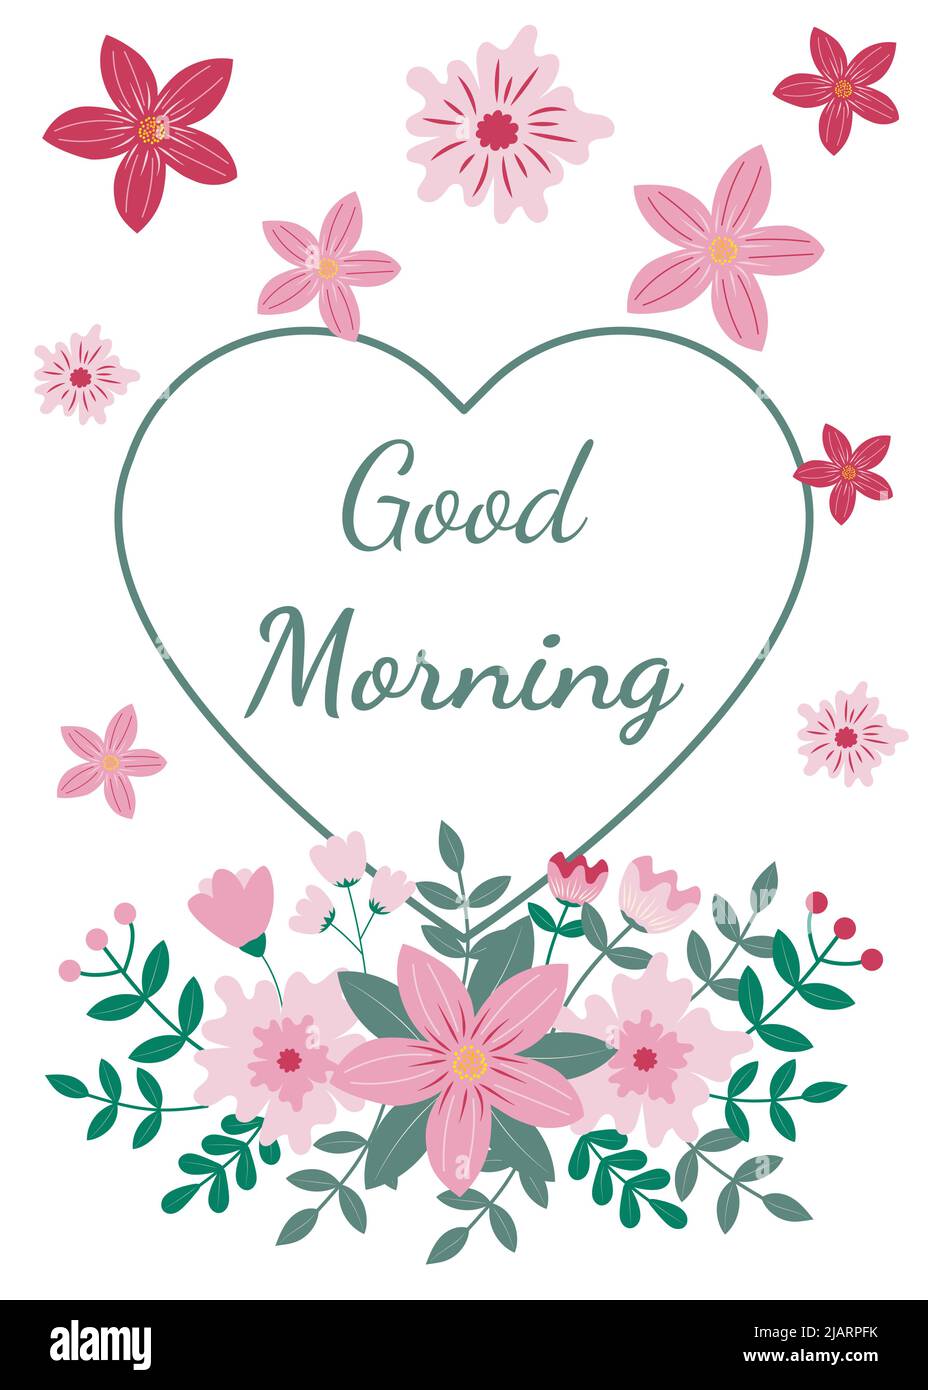 Good morning greeting card with floral ornament on white ...